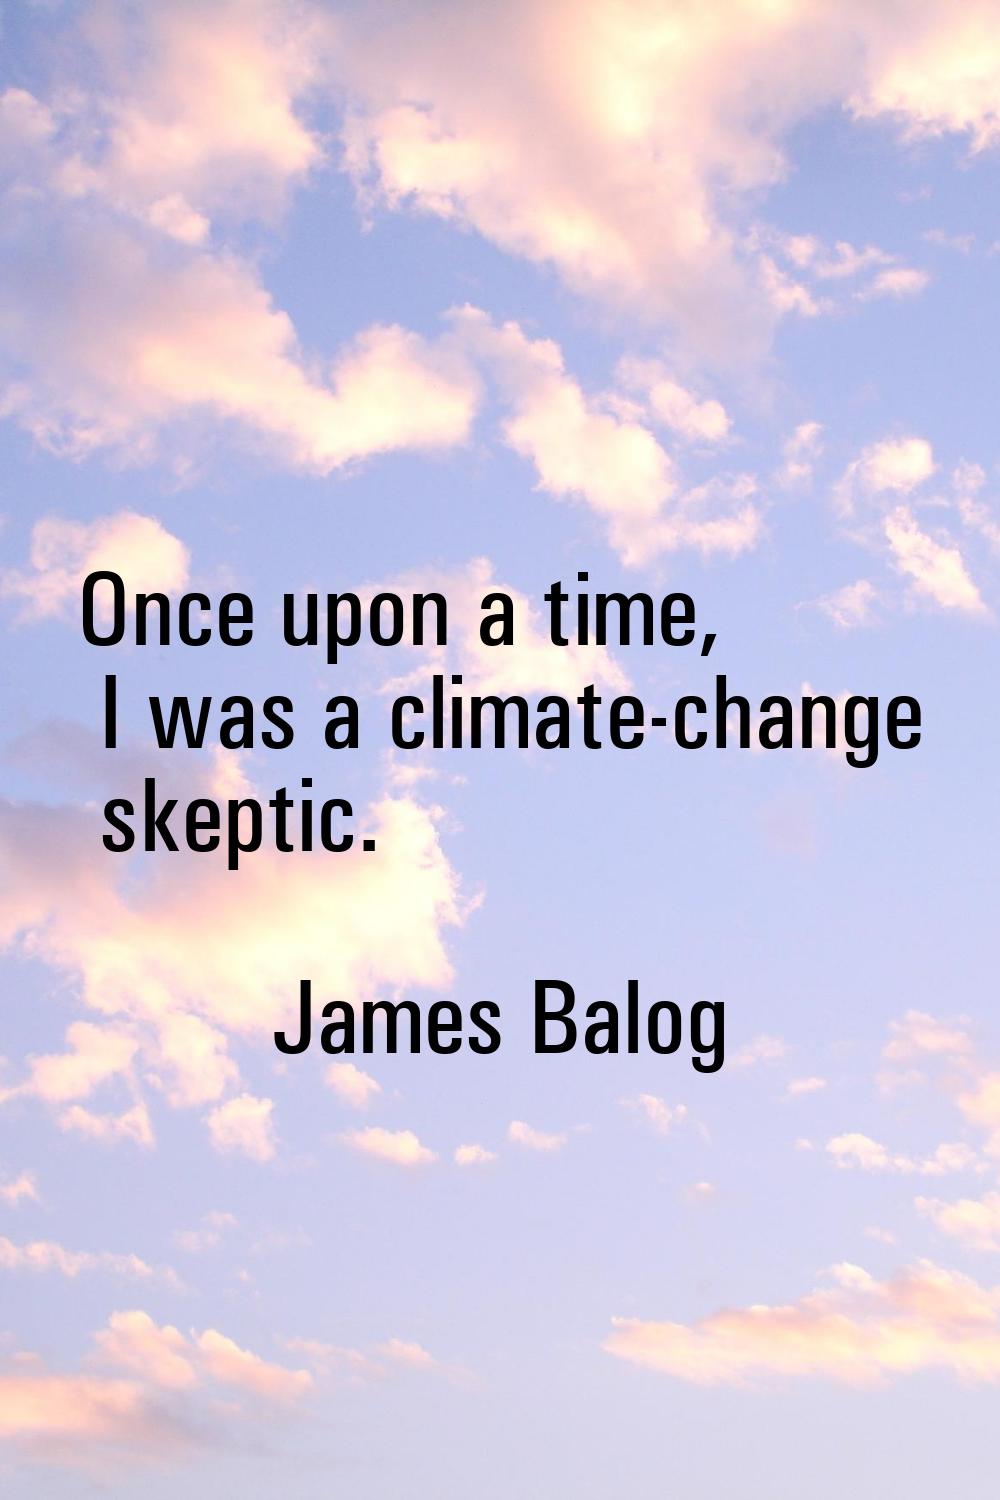 Once upon a time, I was a climate-change skeptic.